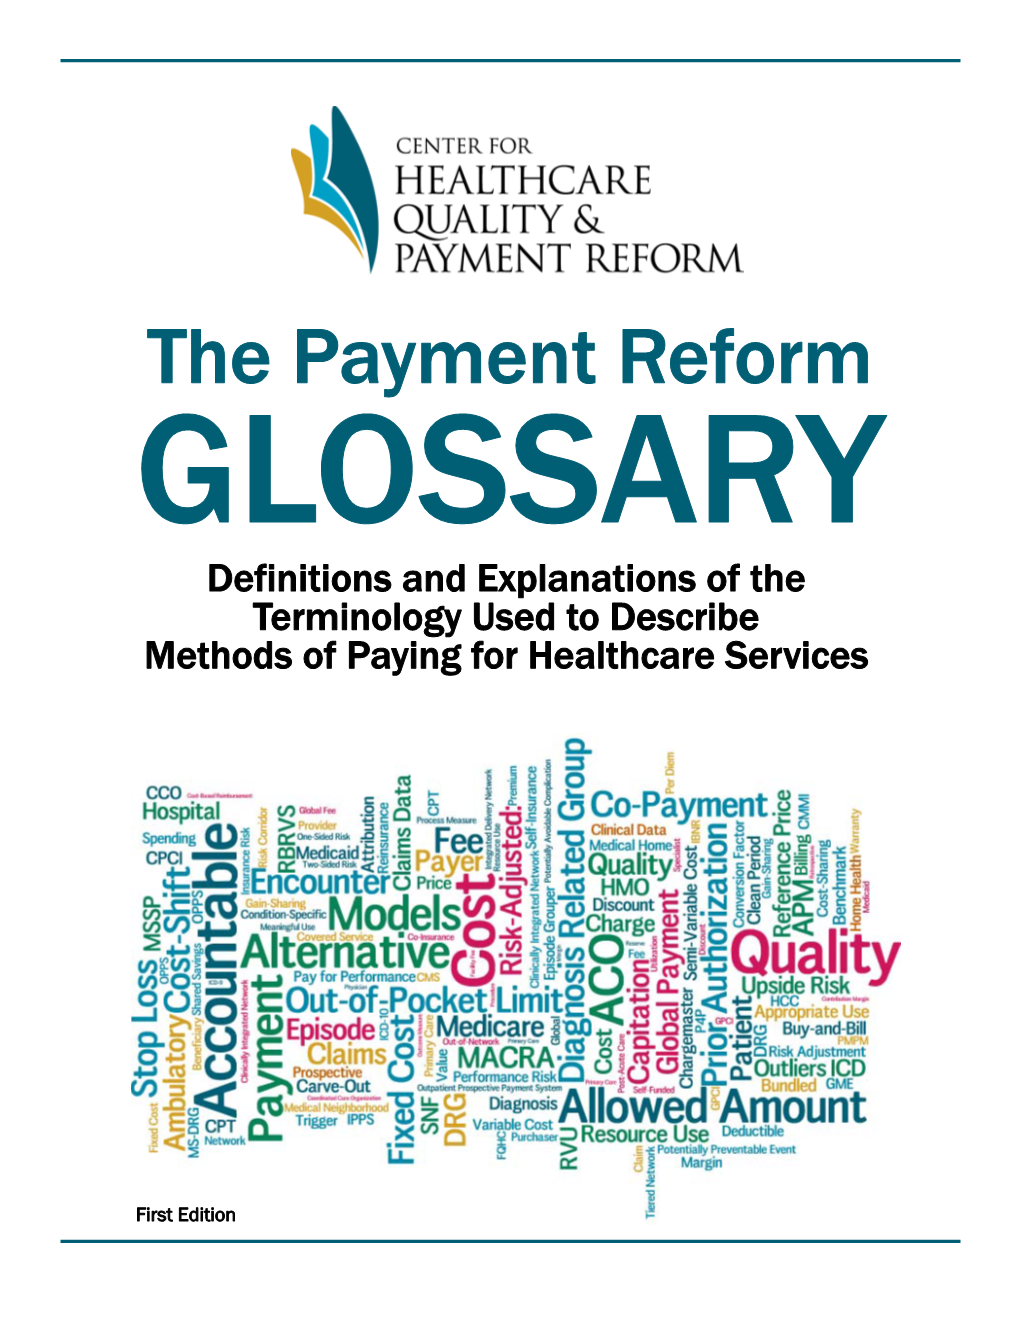 Payment Reform GLOSSARY Definitions and Explanations of the Terminology Used to Describe Methods of Paying for Healthcare Services